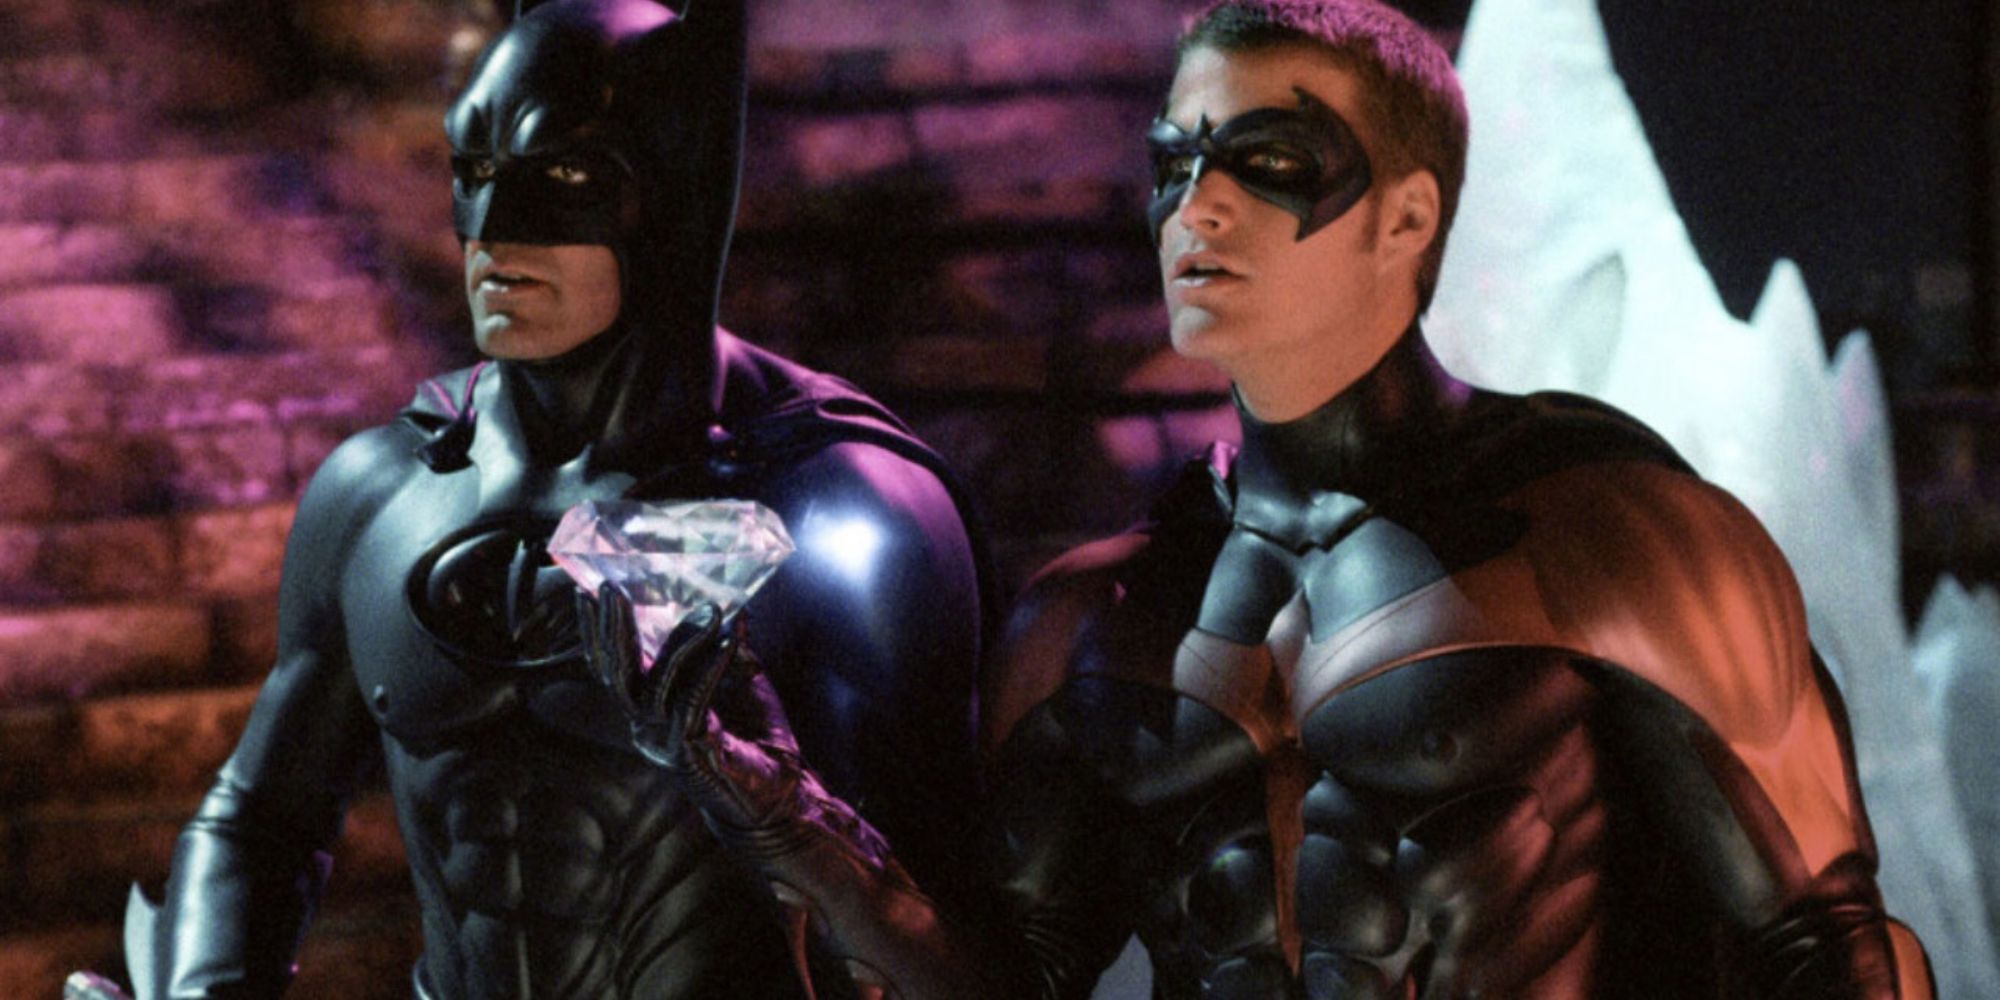 George Clooney and Chris O'Donnell as Batman and Robin looking in the same direction in Batman & Robin.